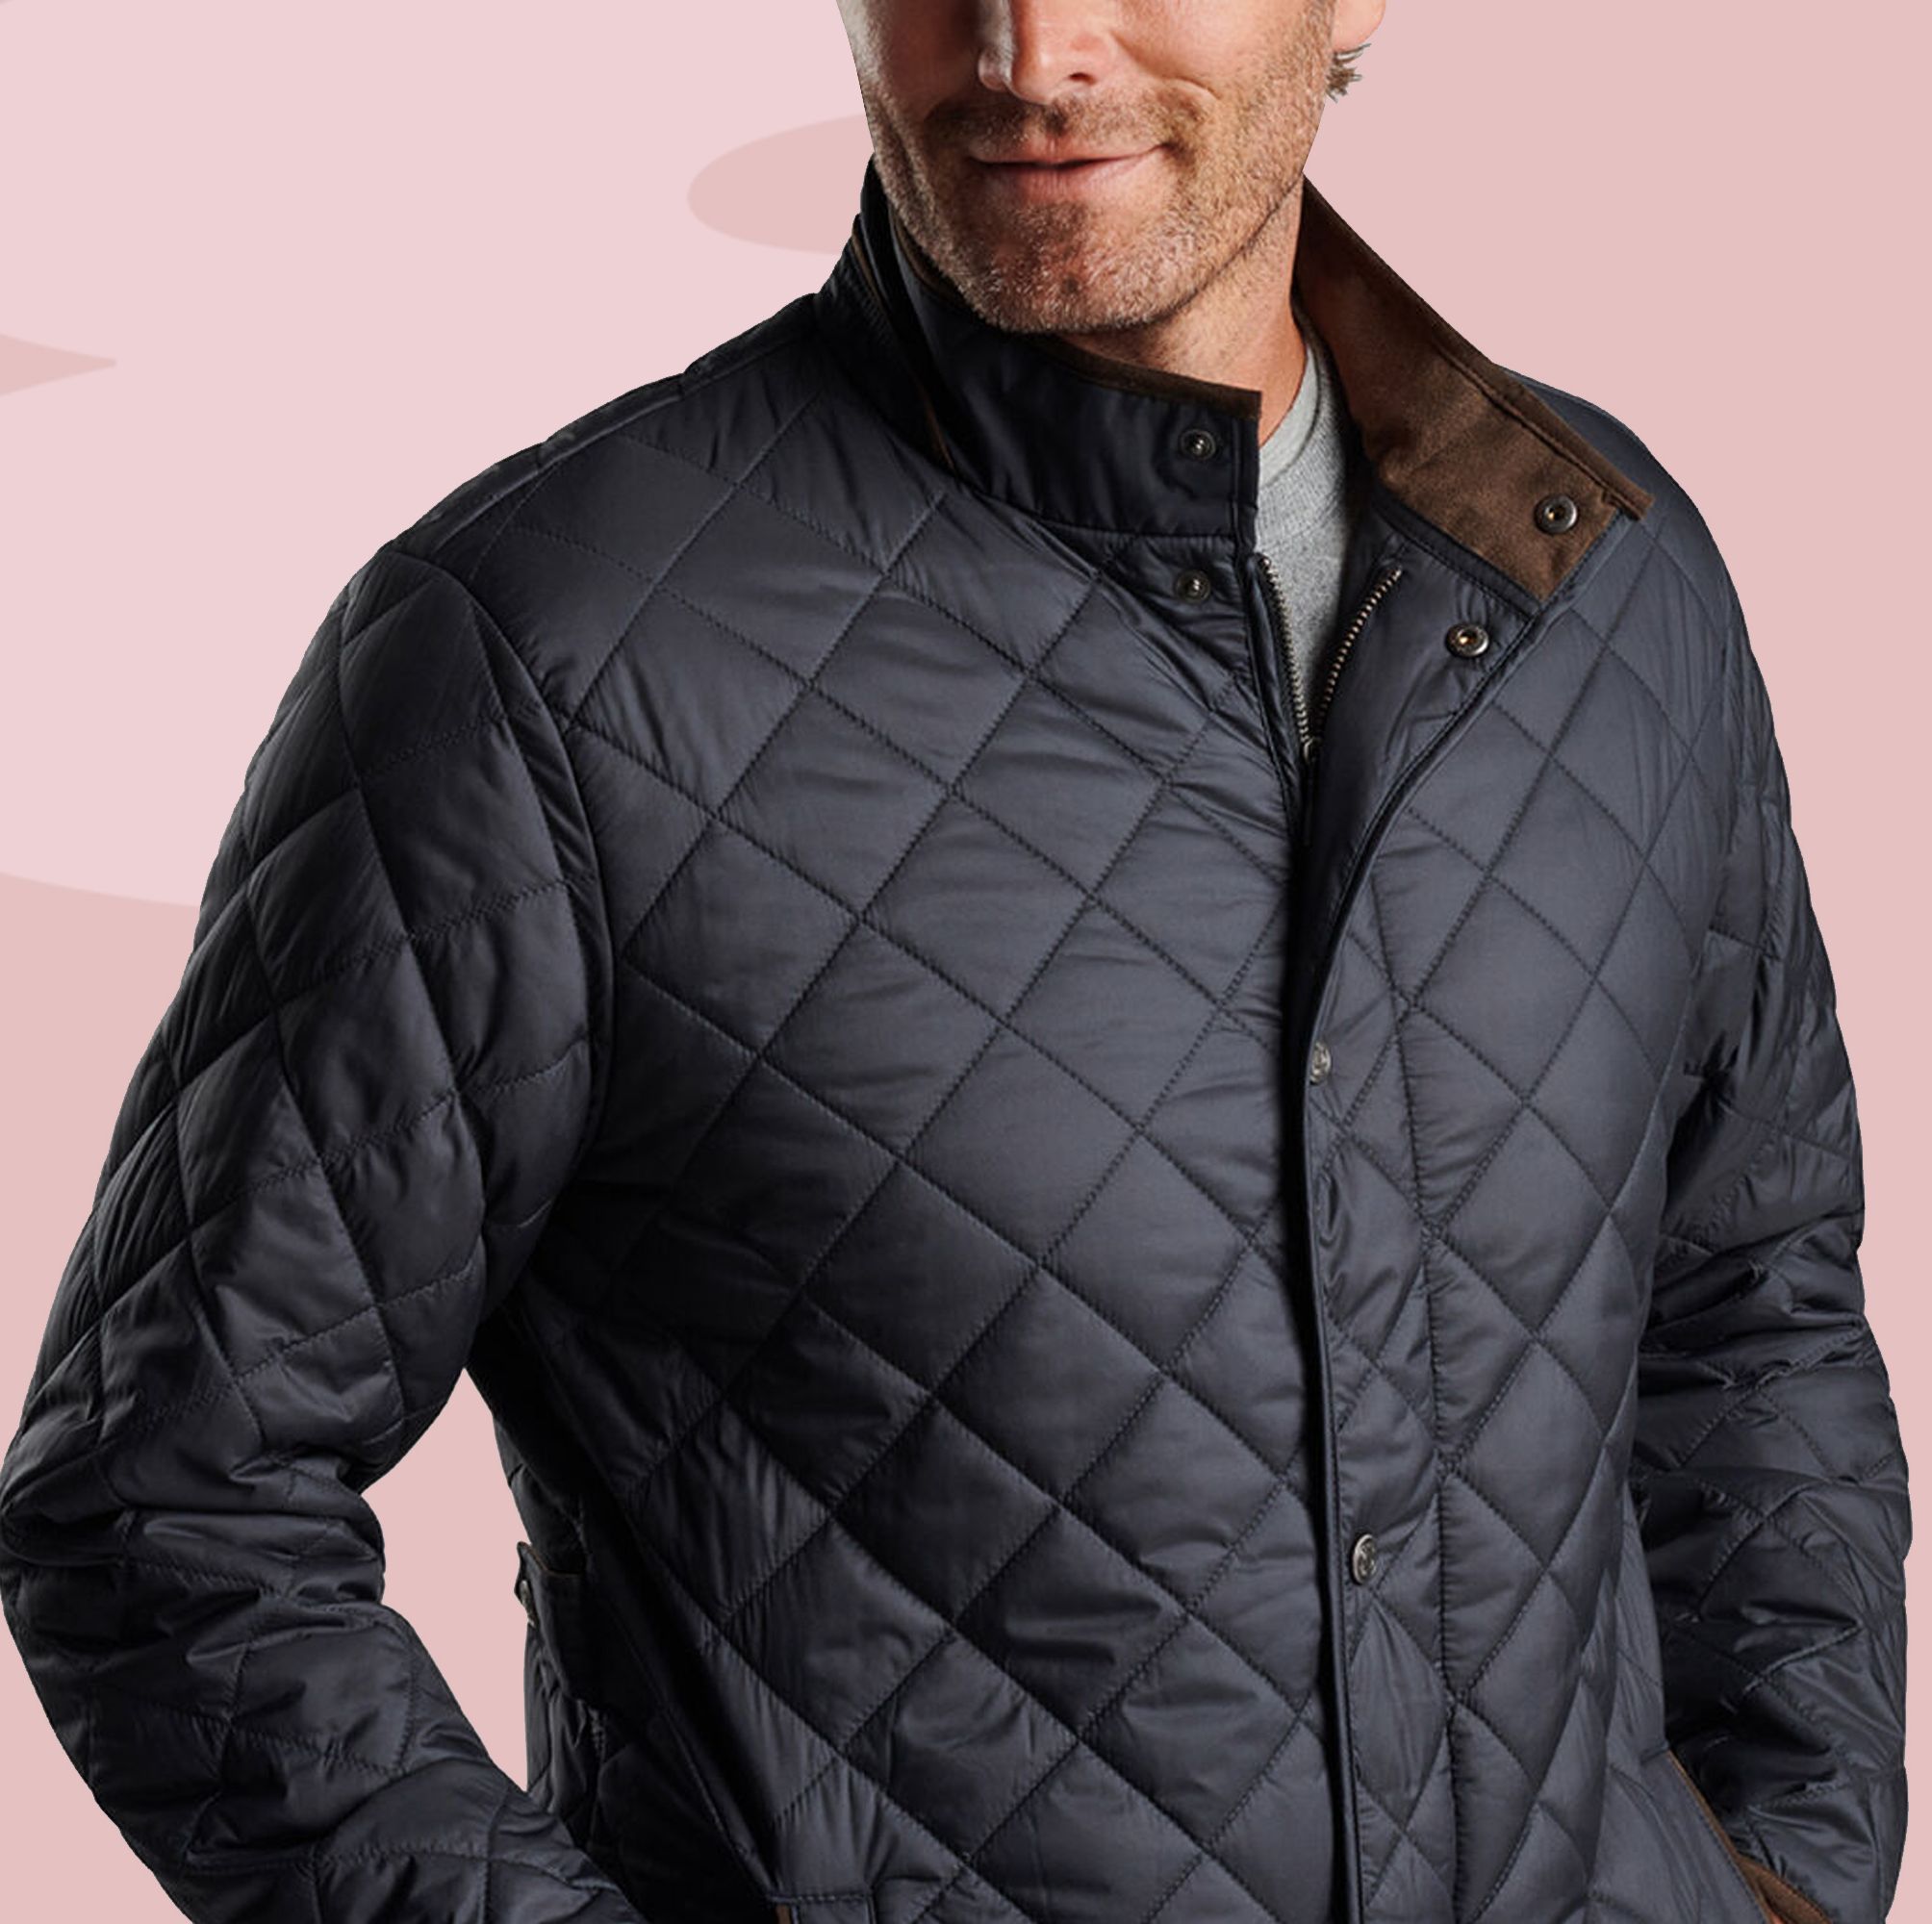 These Quilted Jackets Are About to Become Your Seasonal Staple